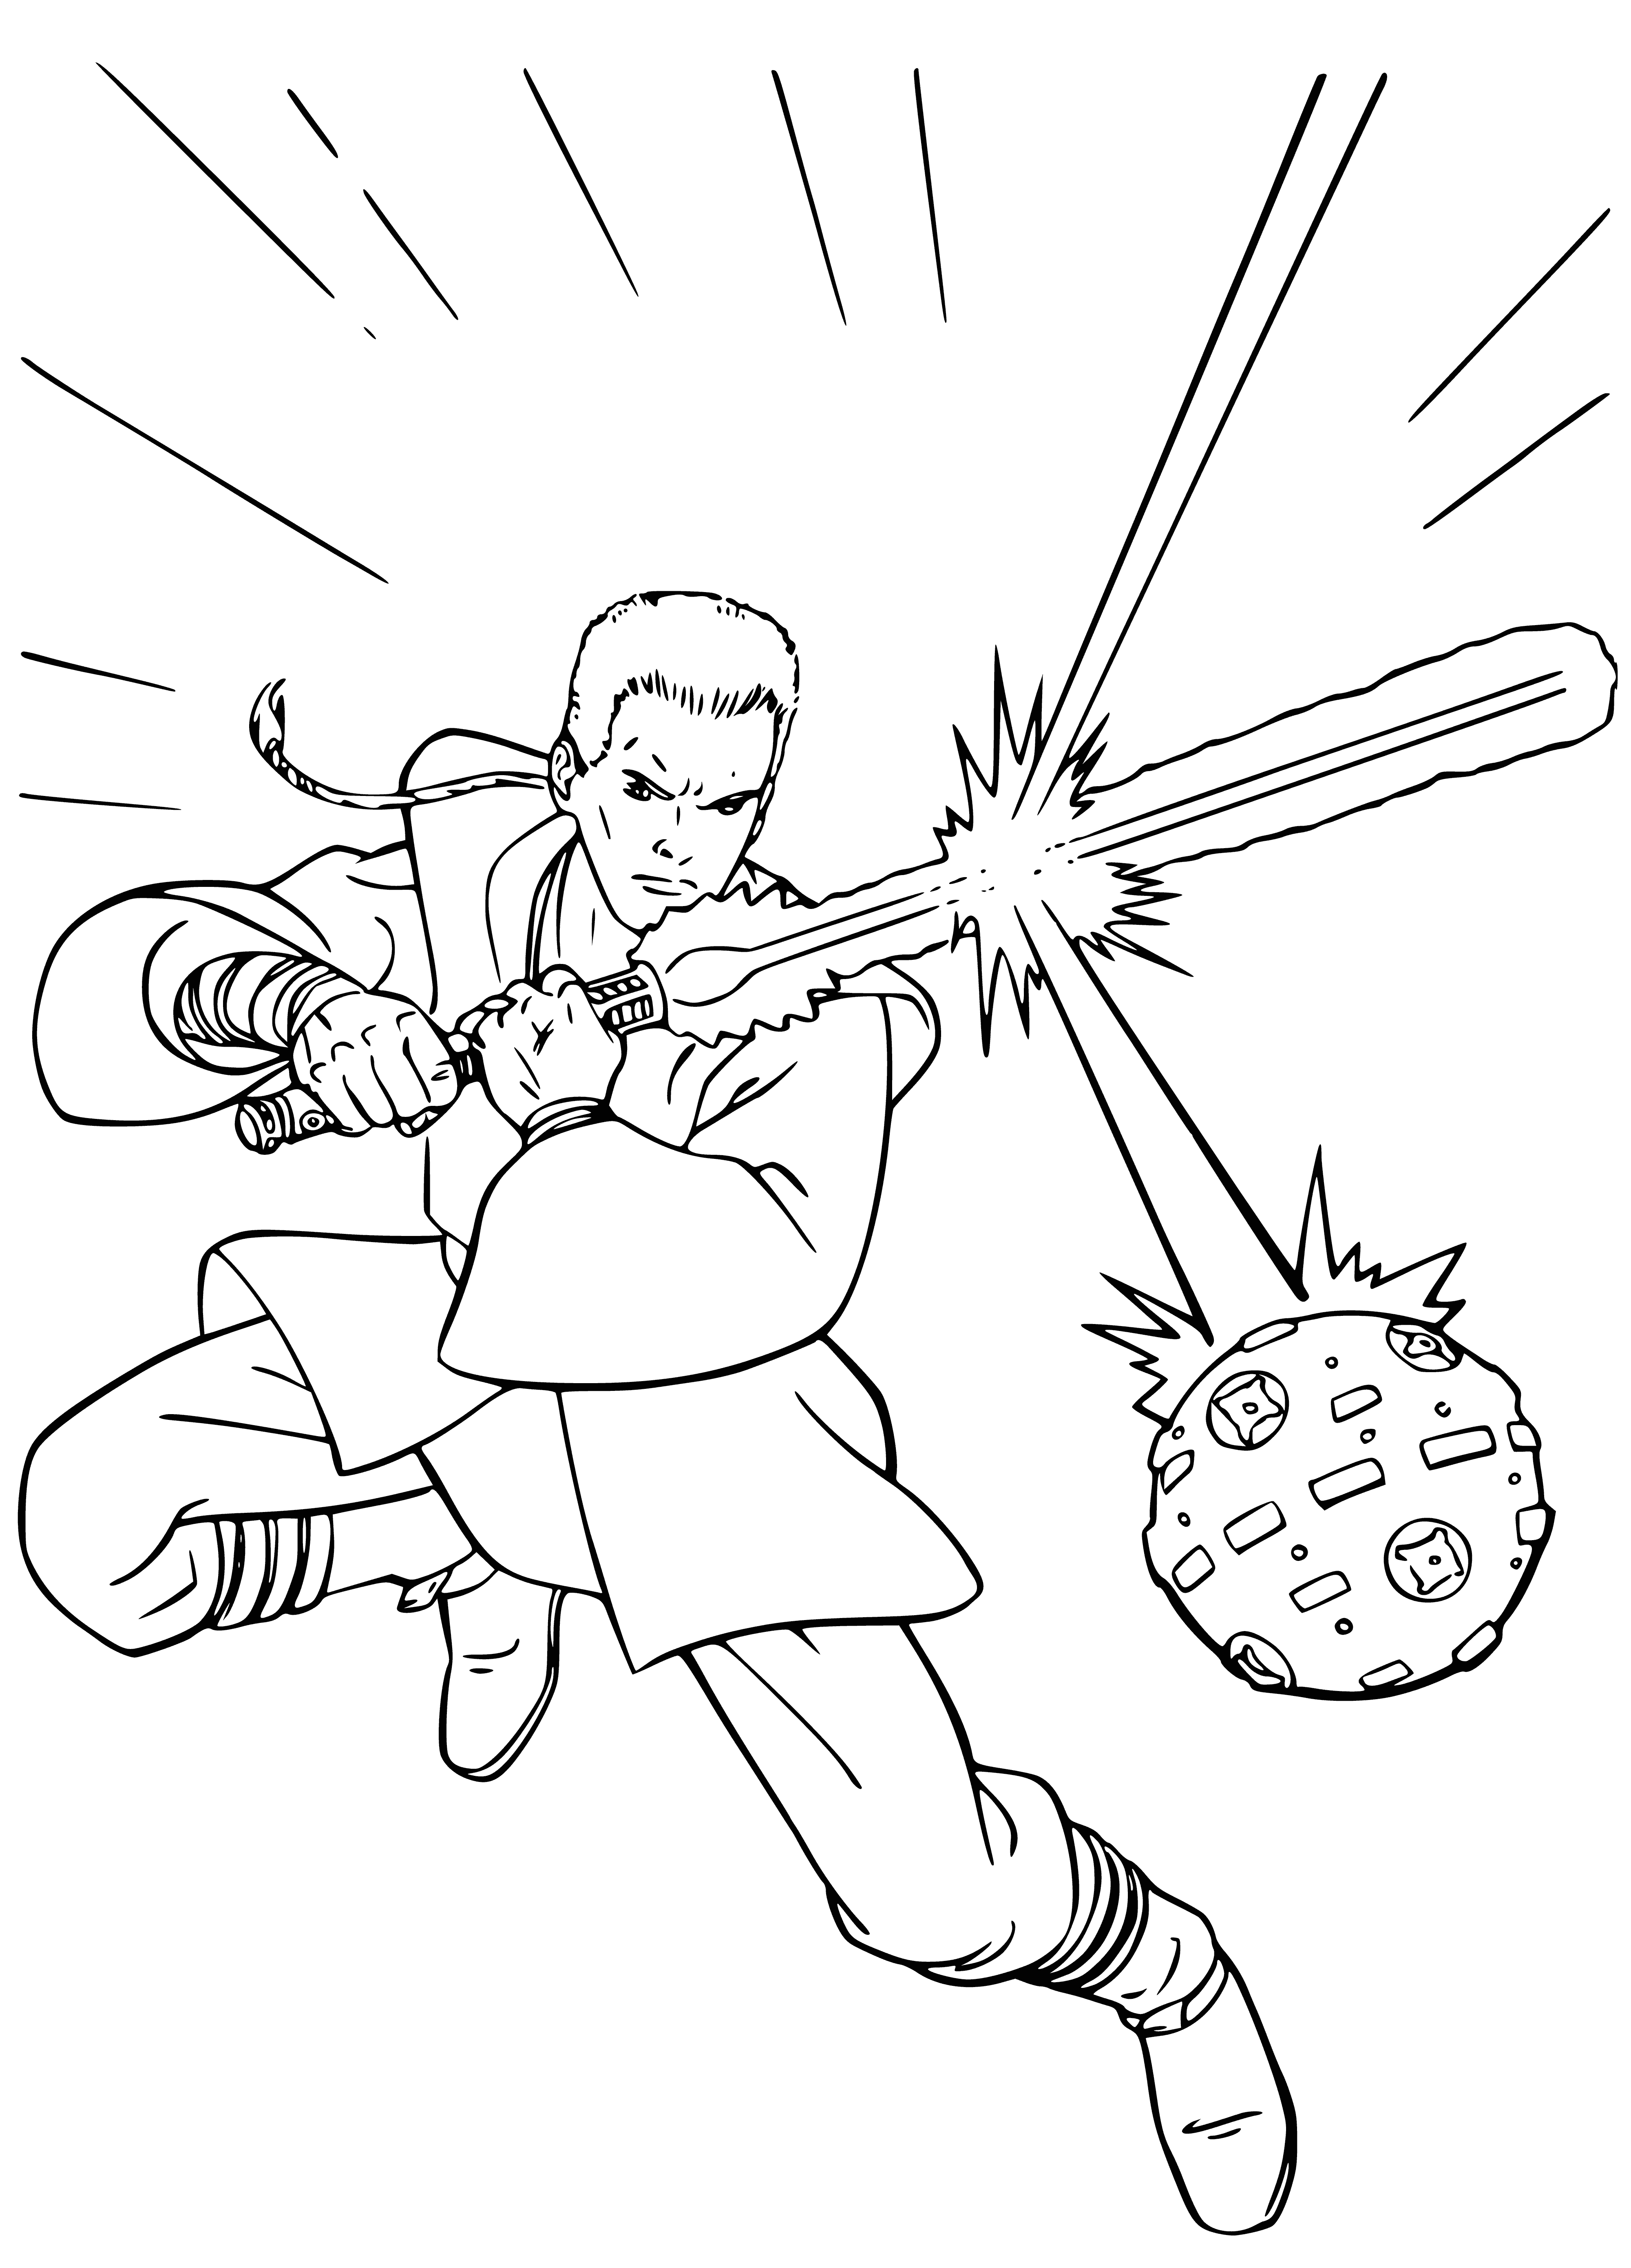 coloring page: Young boy trains to be a Jedi, fighting against droid with lightsaber & Force to deflect its attack.